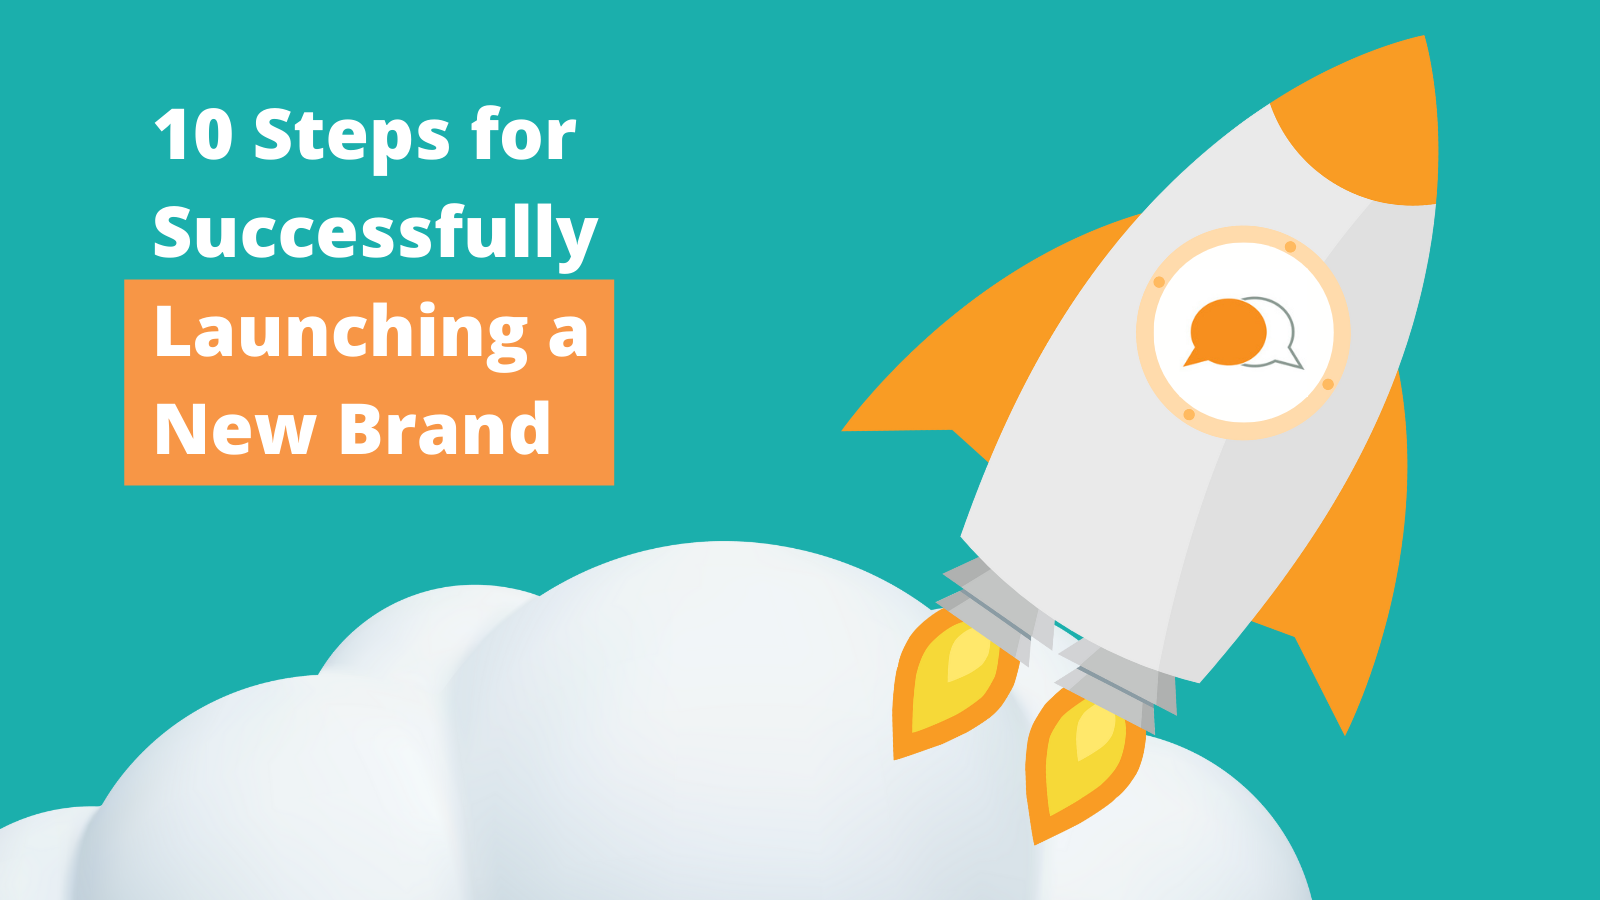 Arlington Strategy - 10 Steps for Successfully Launching a New Brand